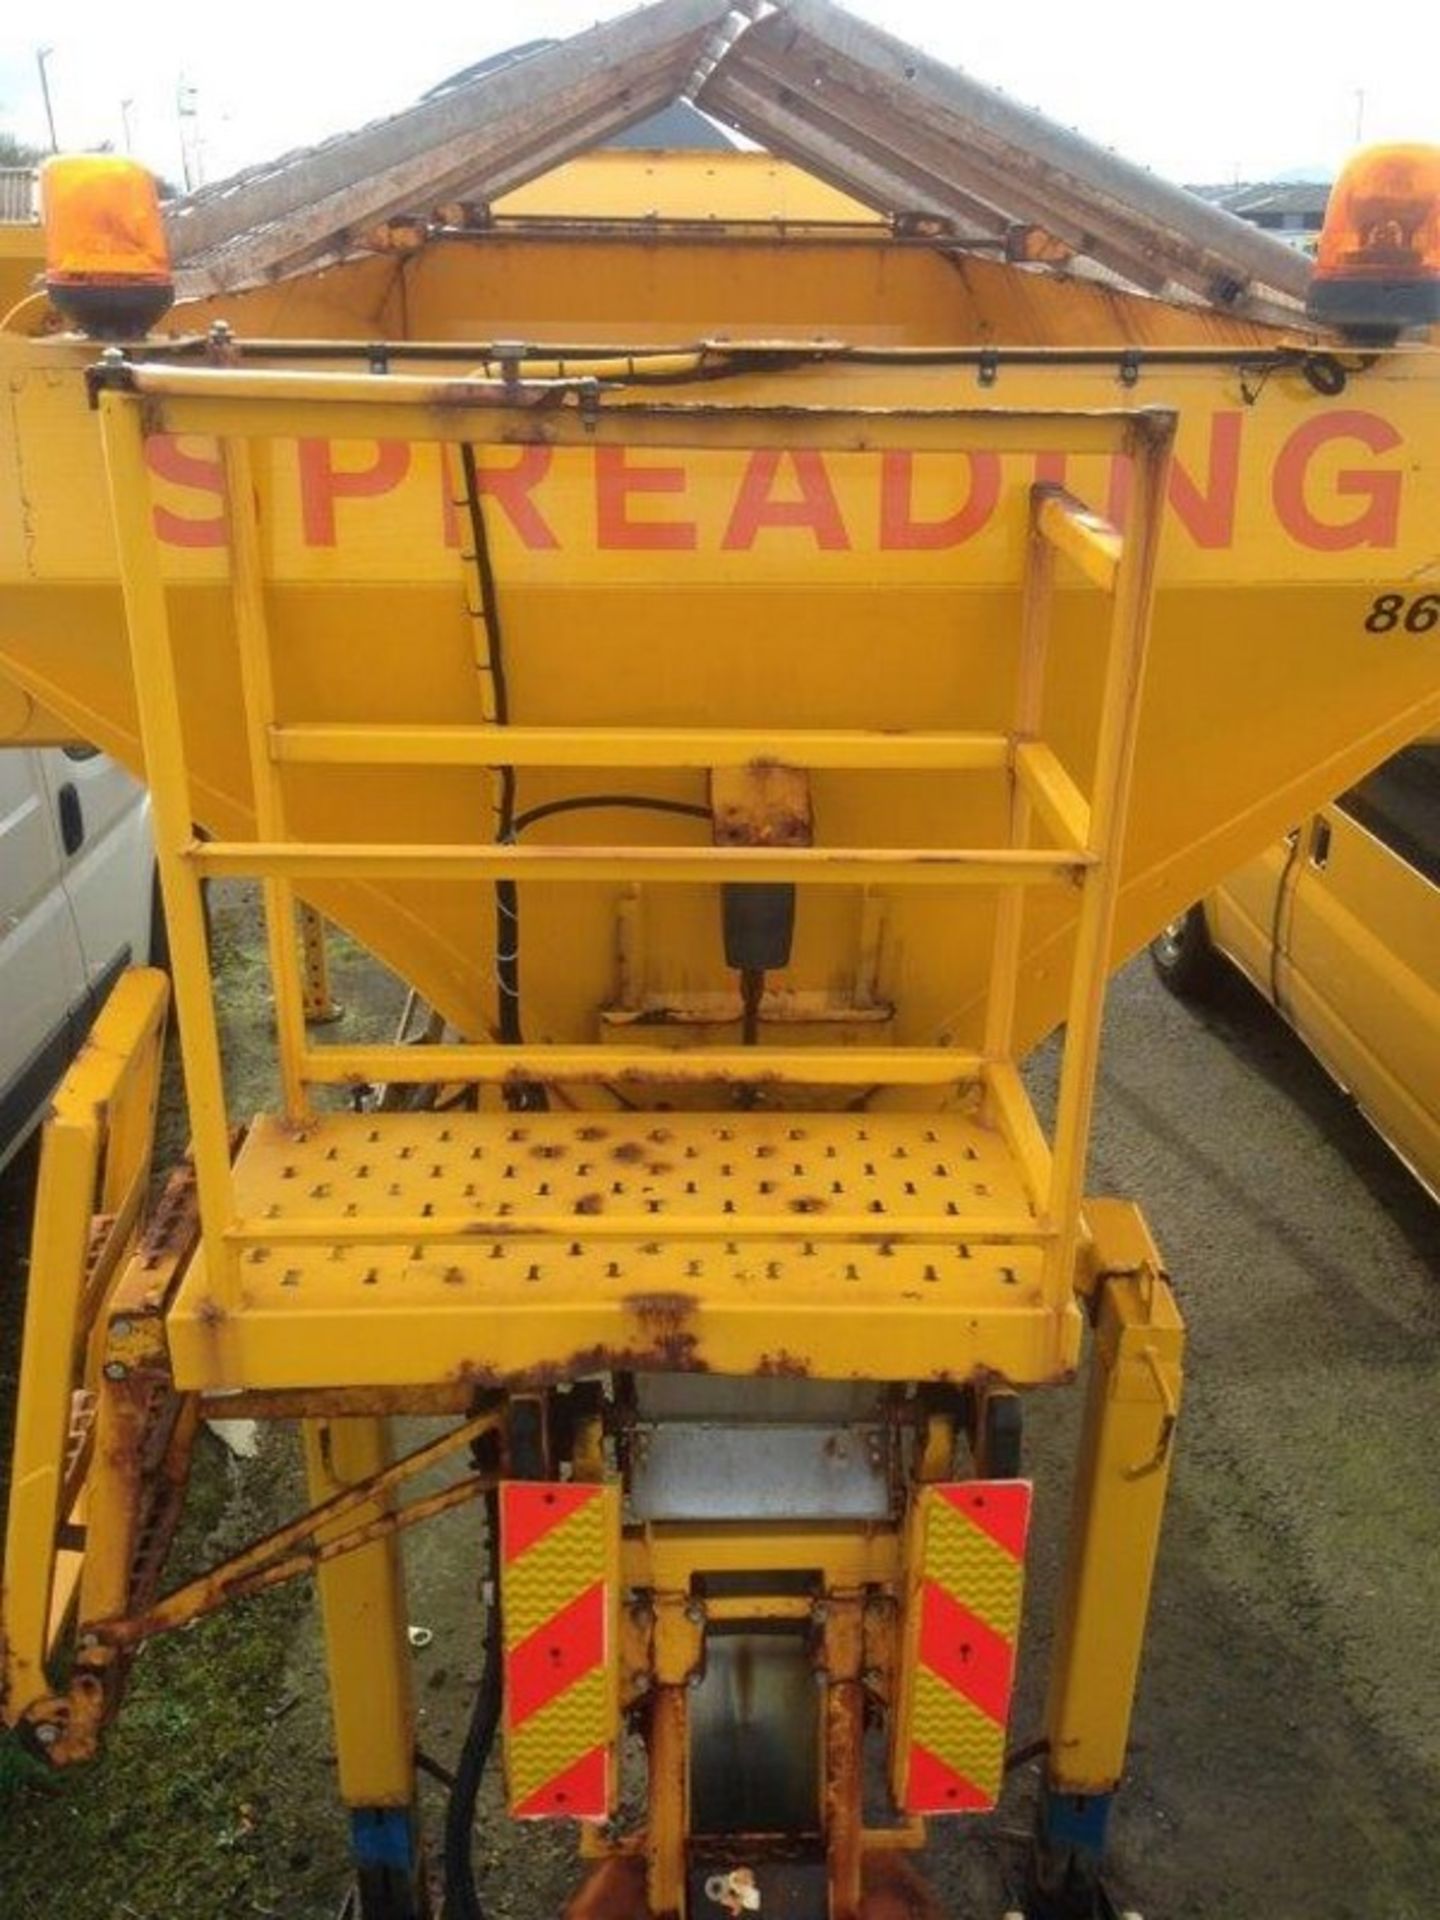 2004 ECON WZCQHJ46 body gritter s/n 37770 Reg No SN58 CVH (861) **To be sold from Errol auction s - Image 9 of 12